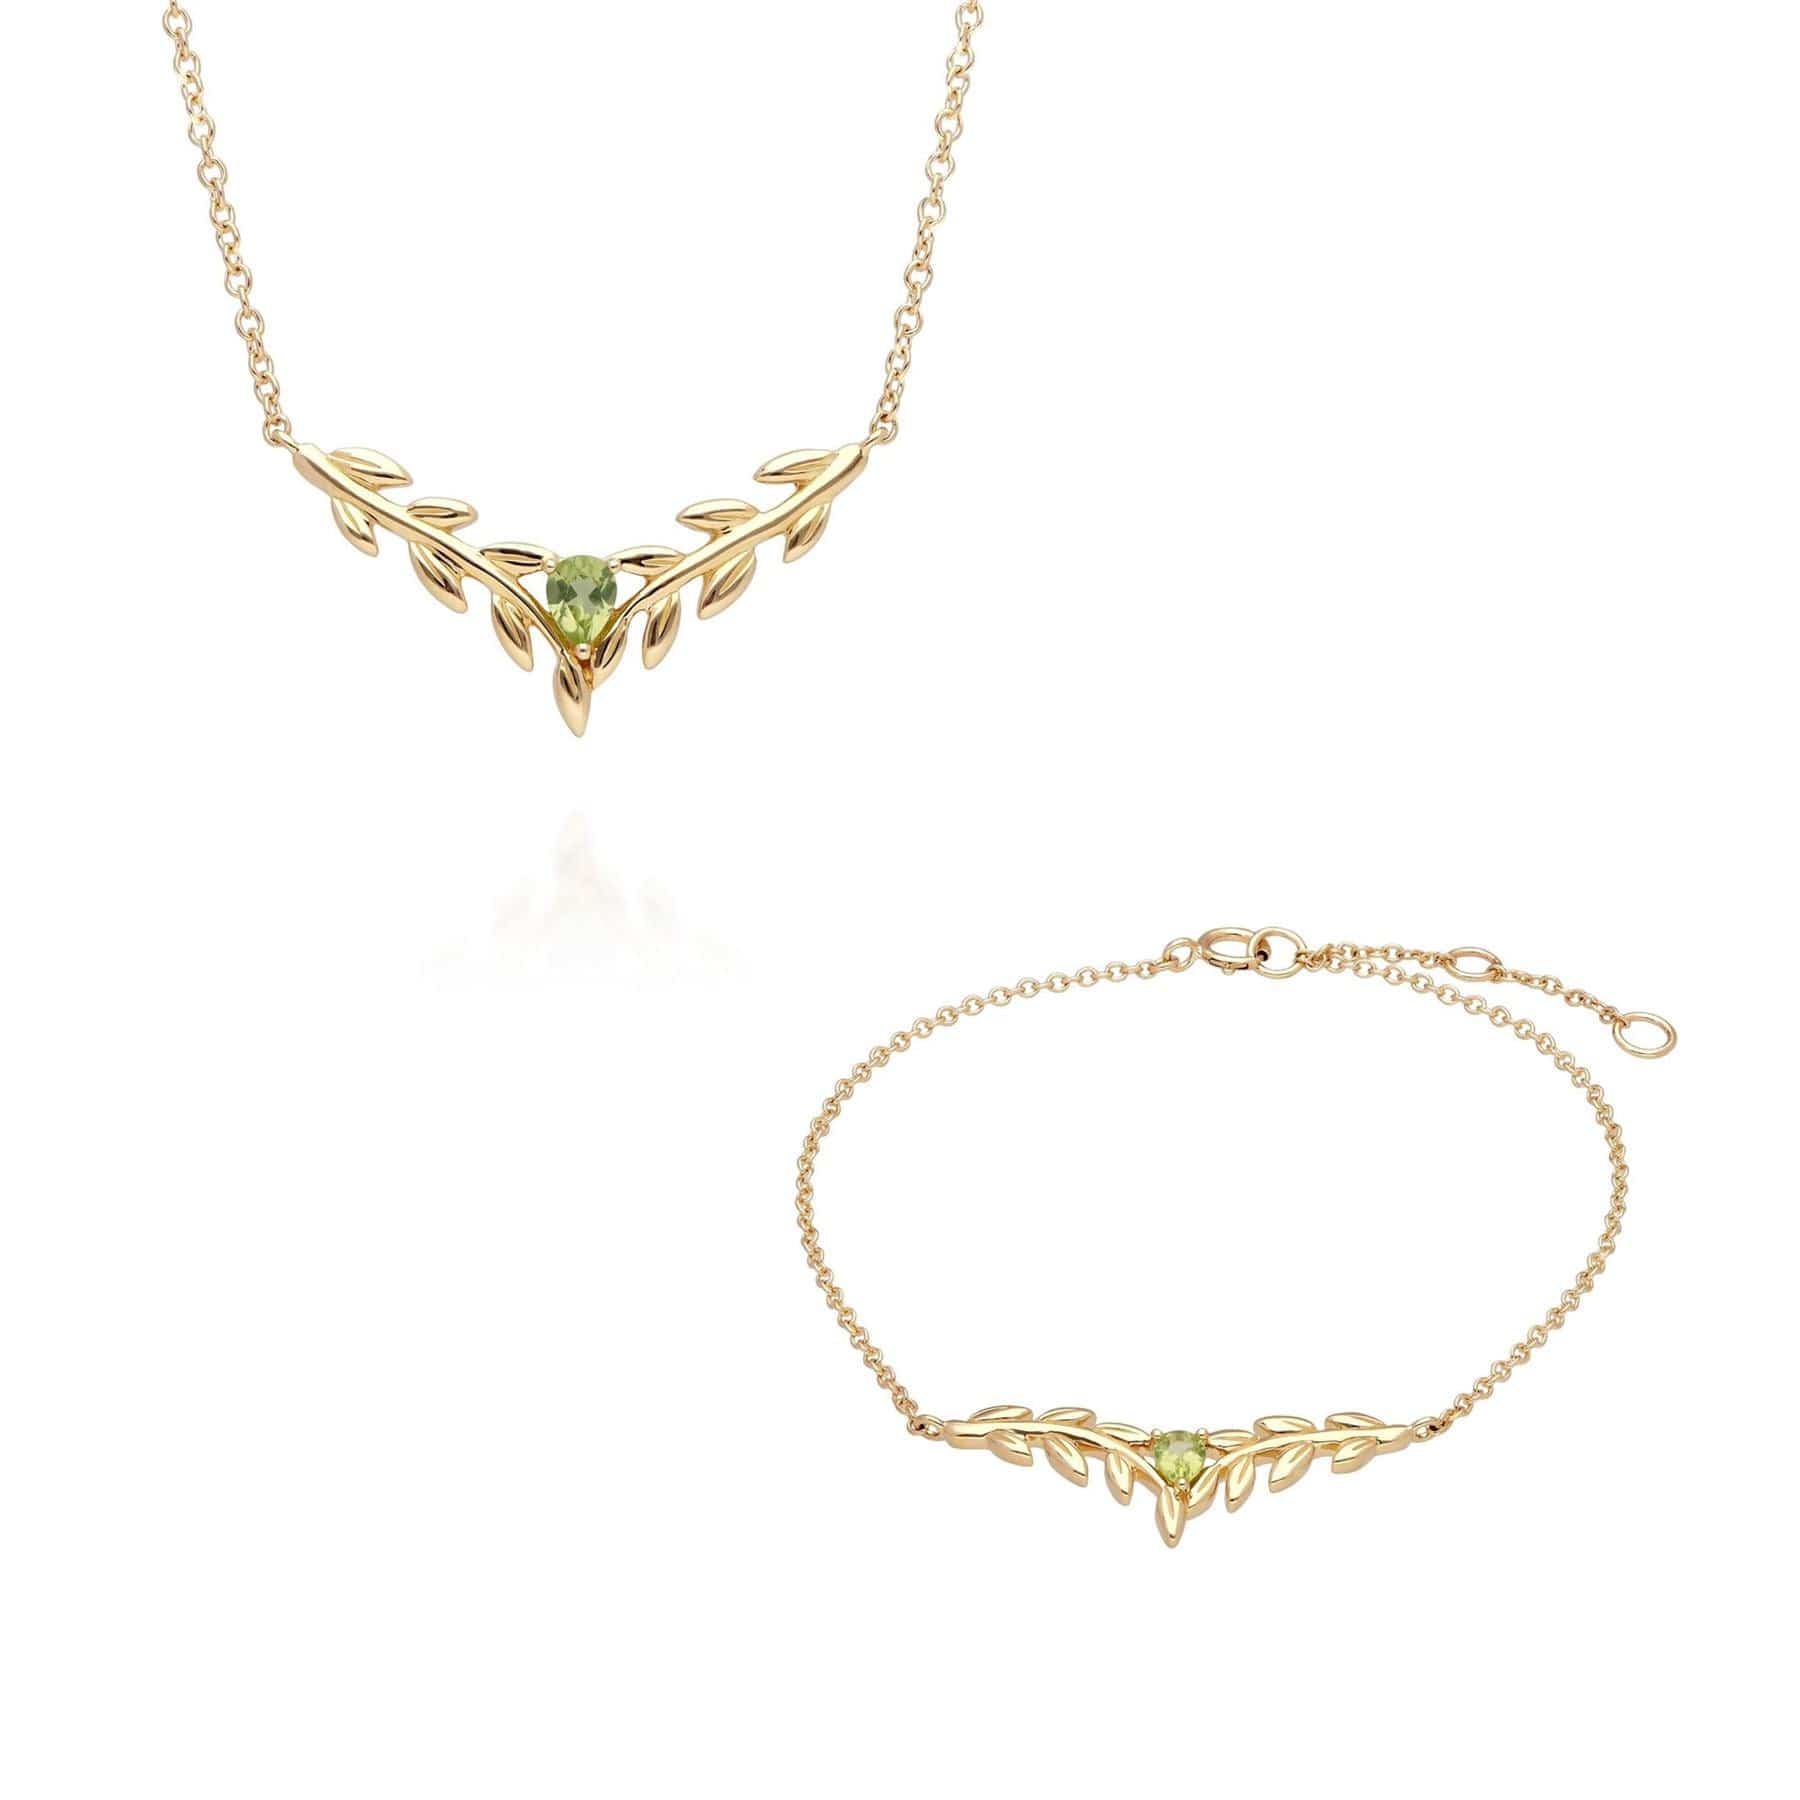 135N0366019-135L0309019 O Leaf Peridot Necklace & Bracelet Set in 9ct Yellow Gold 1